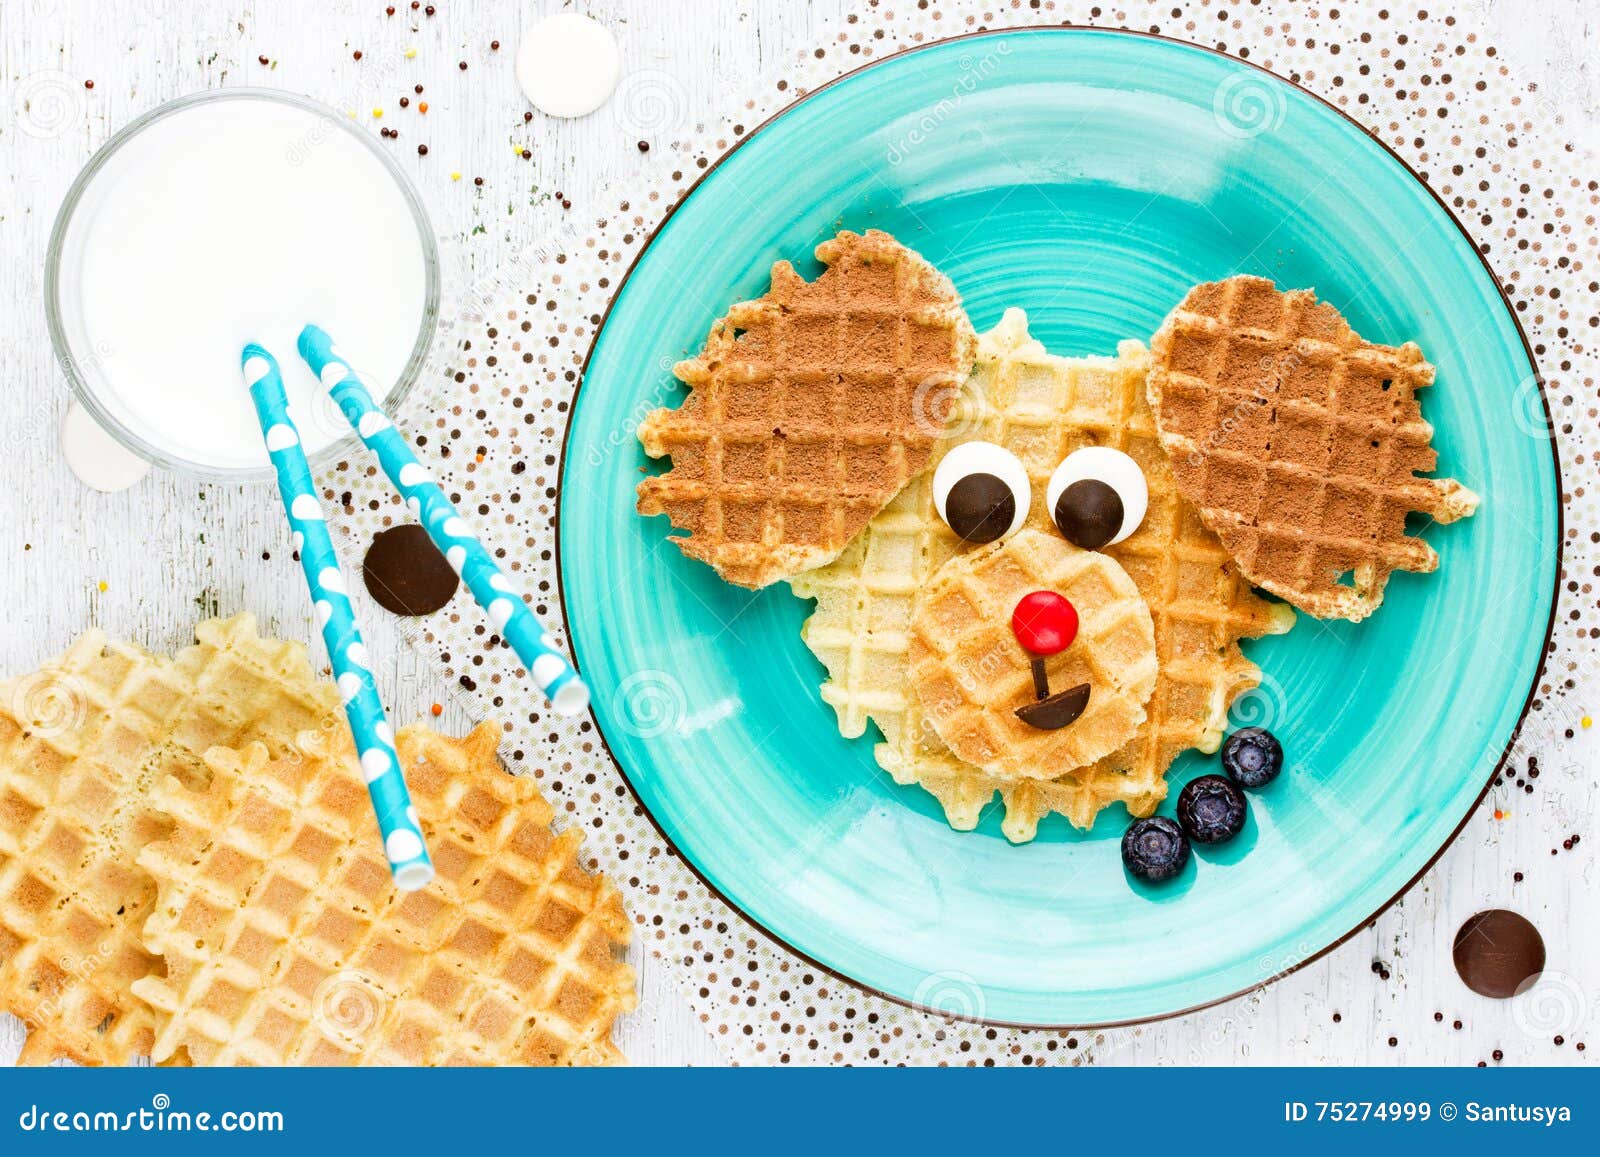 Puppy Dog Waffles for Baby Breakfast. Animal-shaped Adorable Art